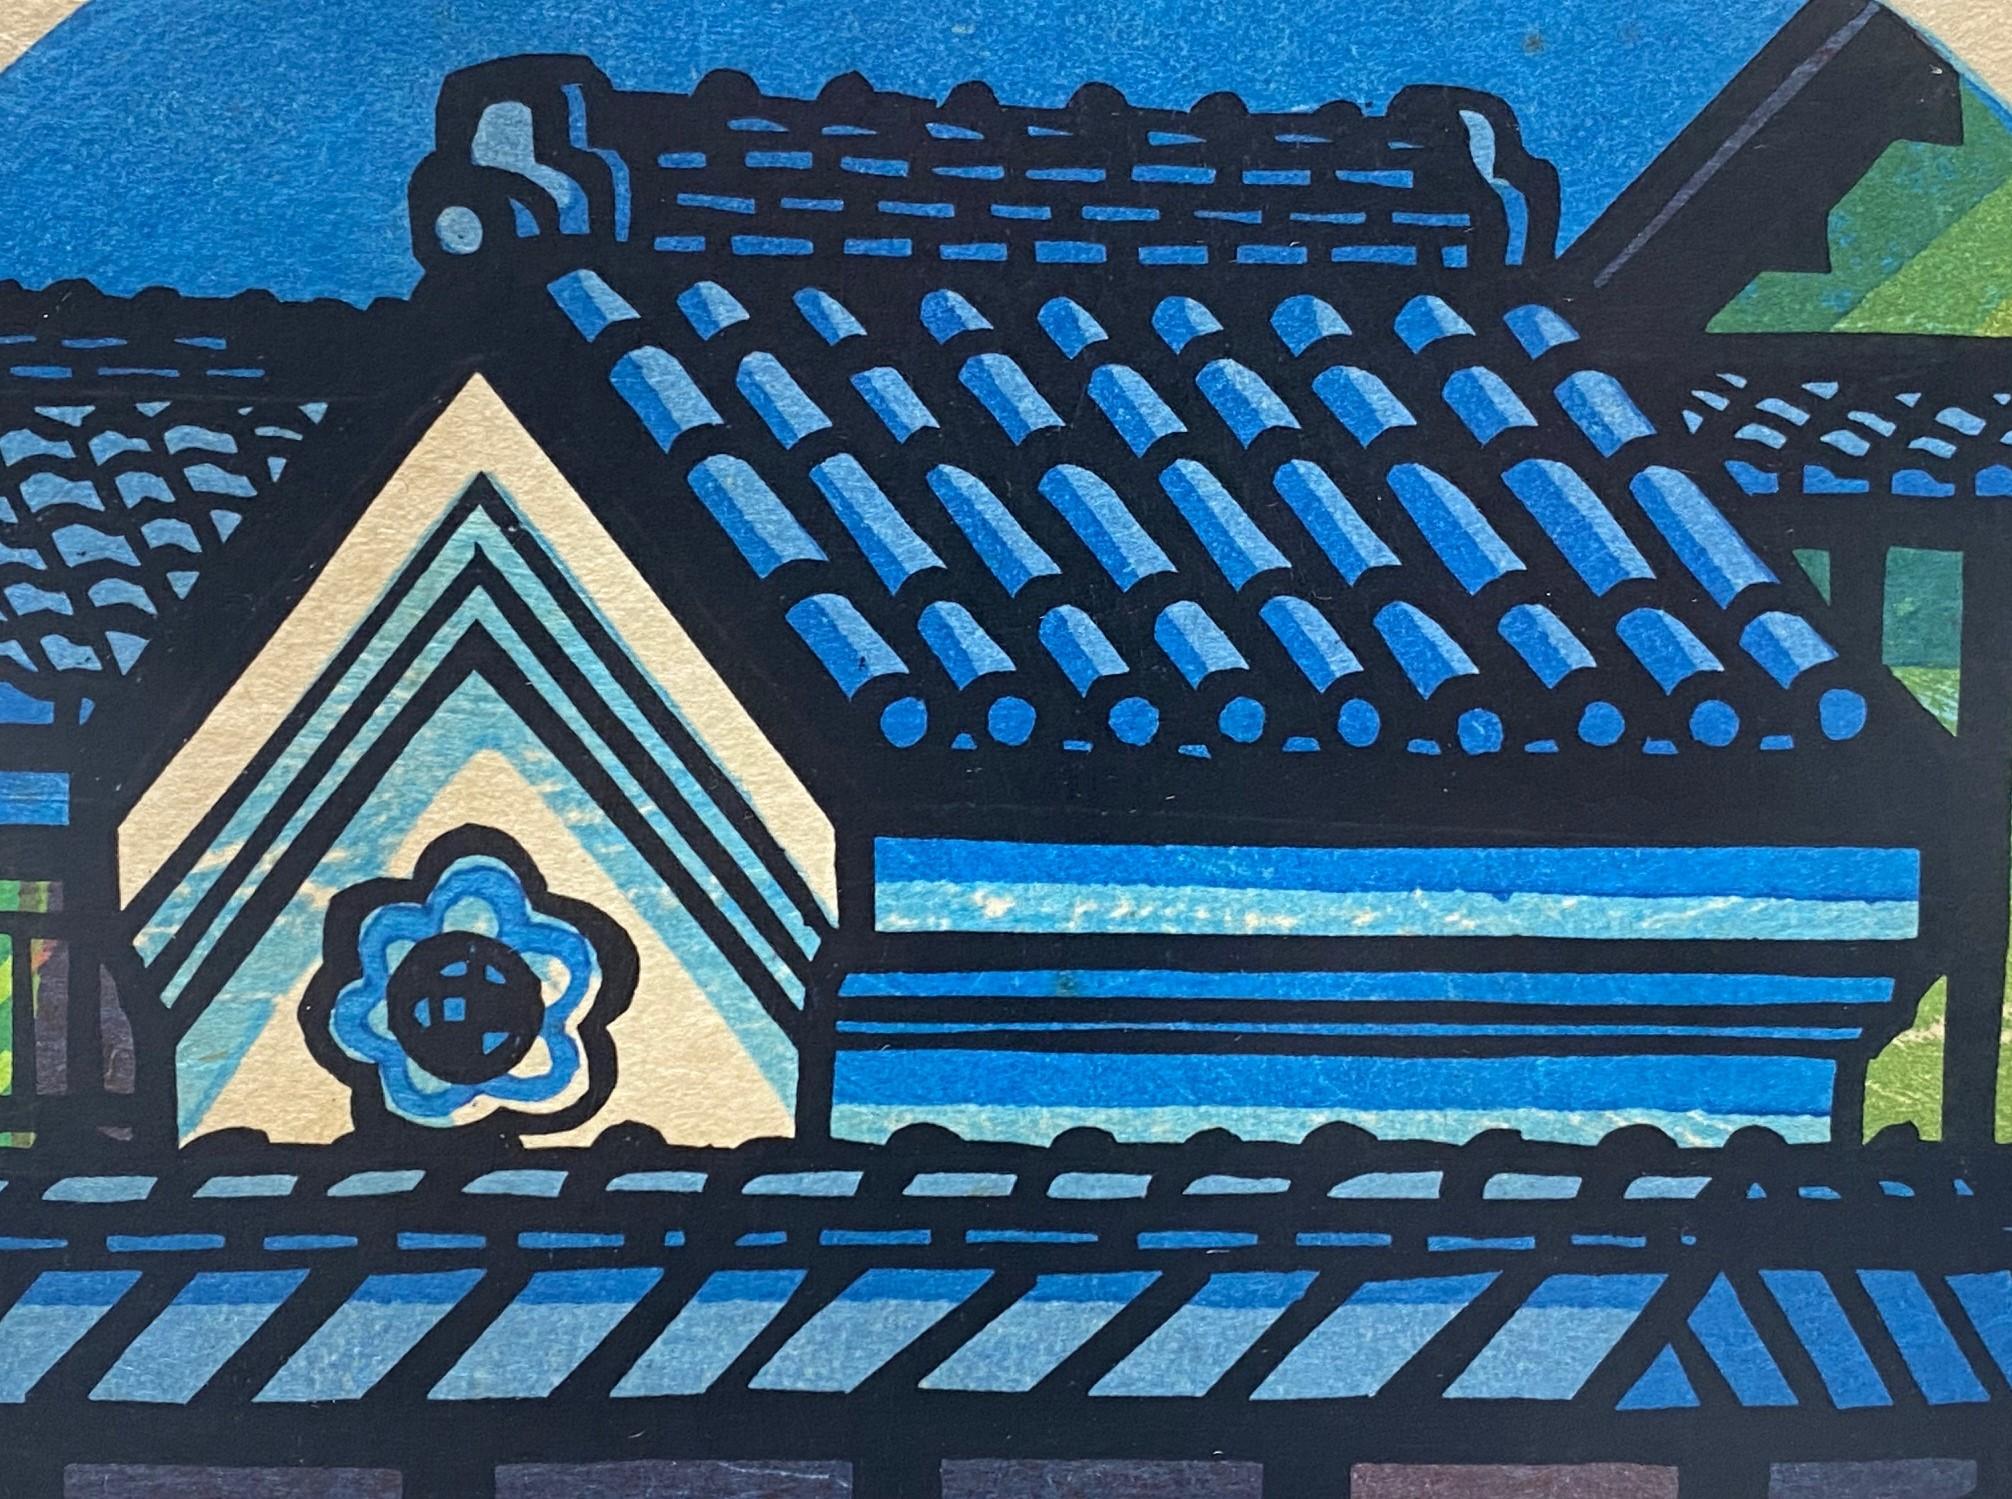 Clifton Karhu Signed Limited Edition Japanese Woodblock Print Rooftop in Kyoto For Sale 2